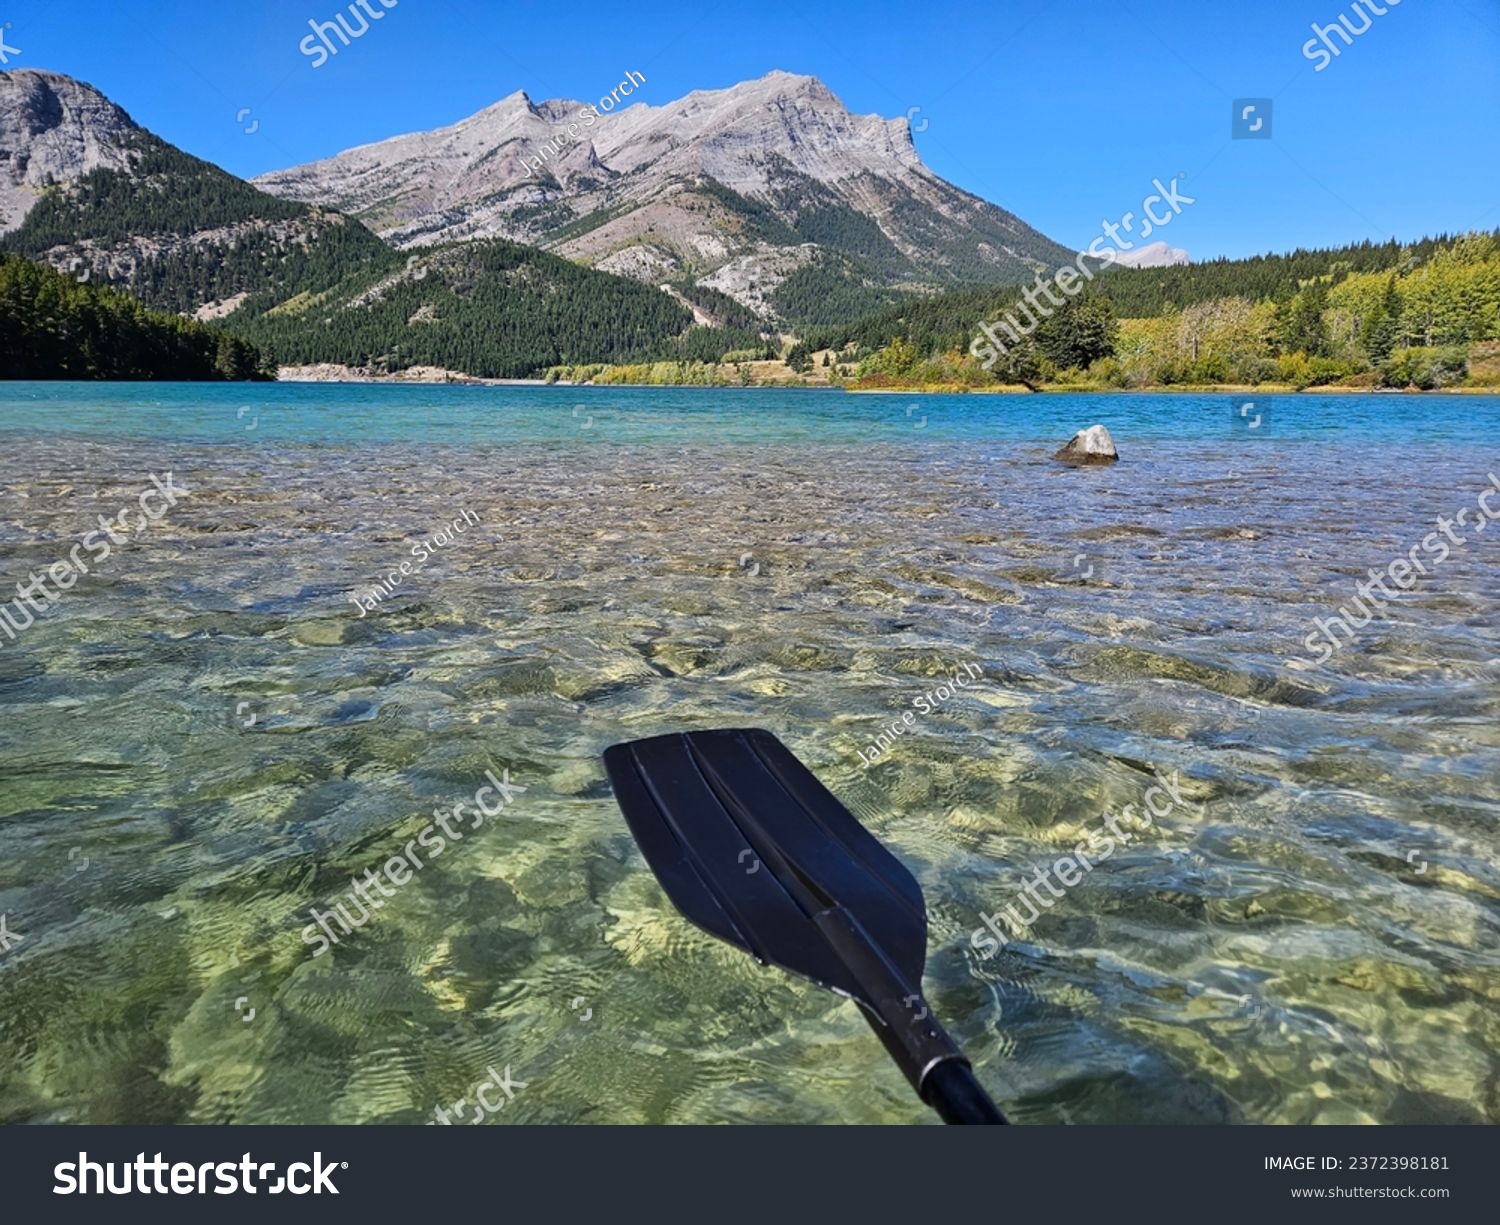 Outdoor watersport recreational image of a black plastic kayak paddle, a clear freshwater lake and a mountain range in the background. #2372398181